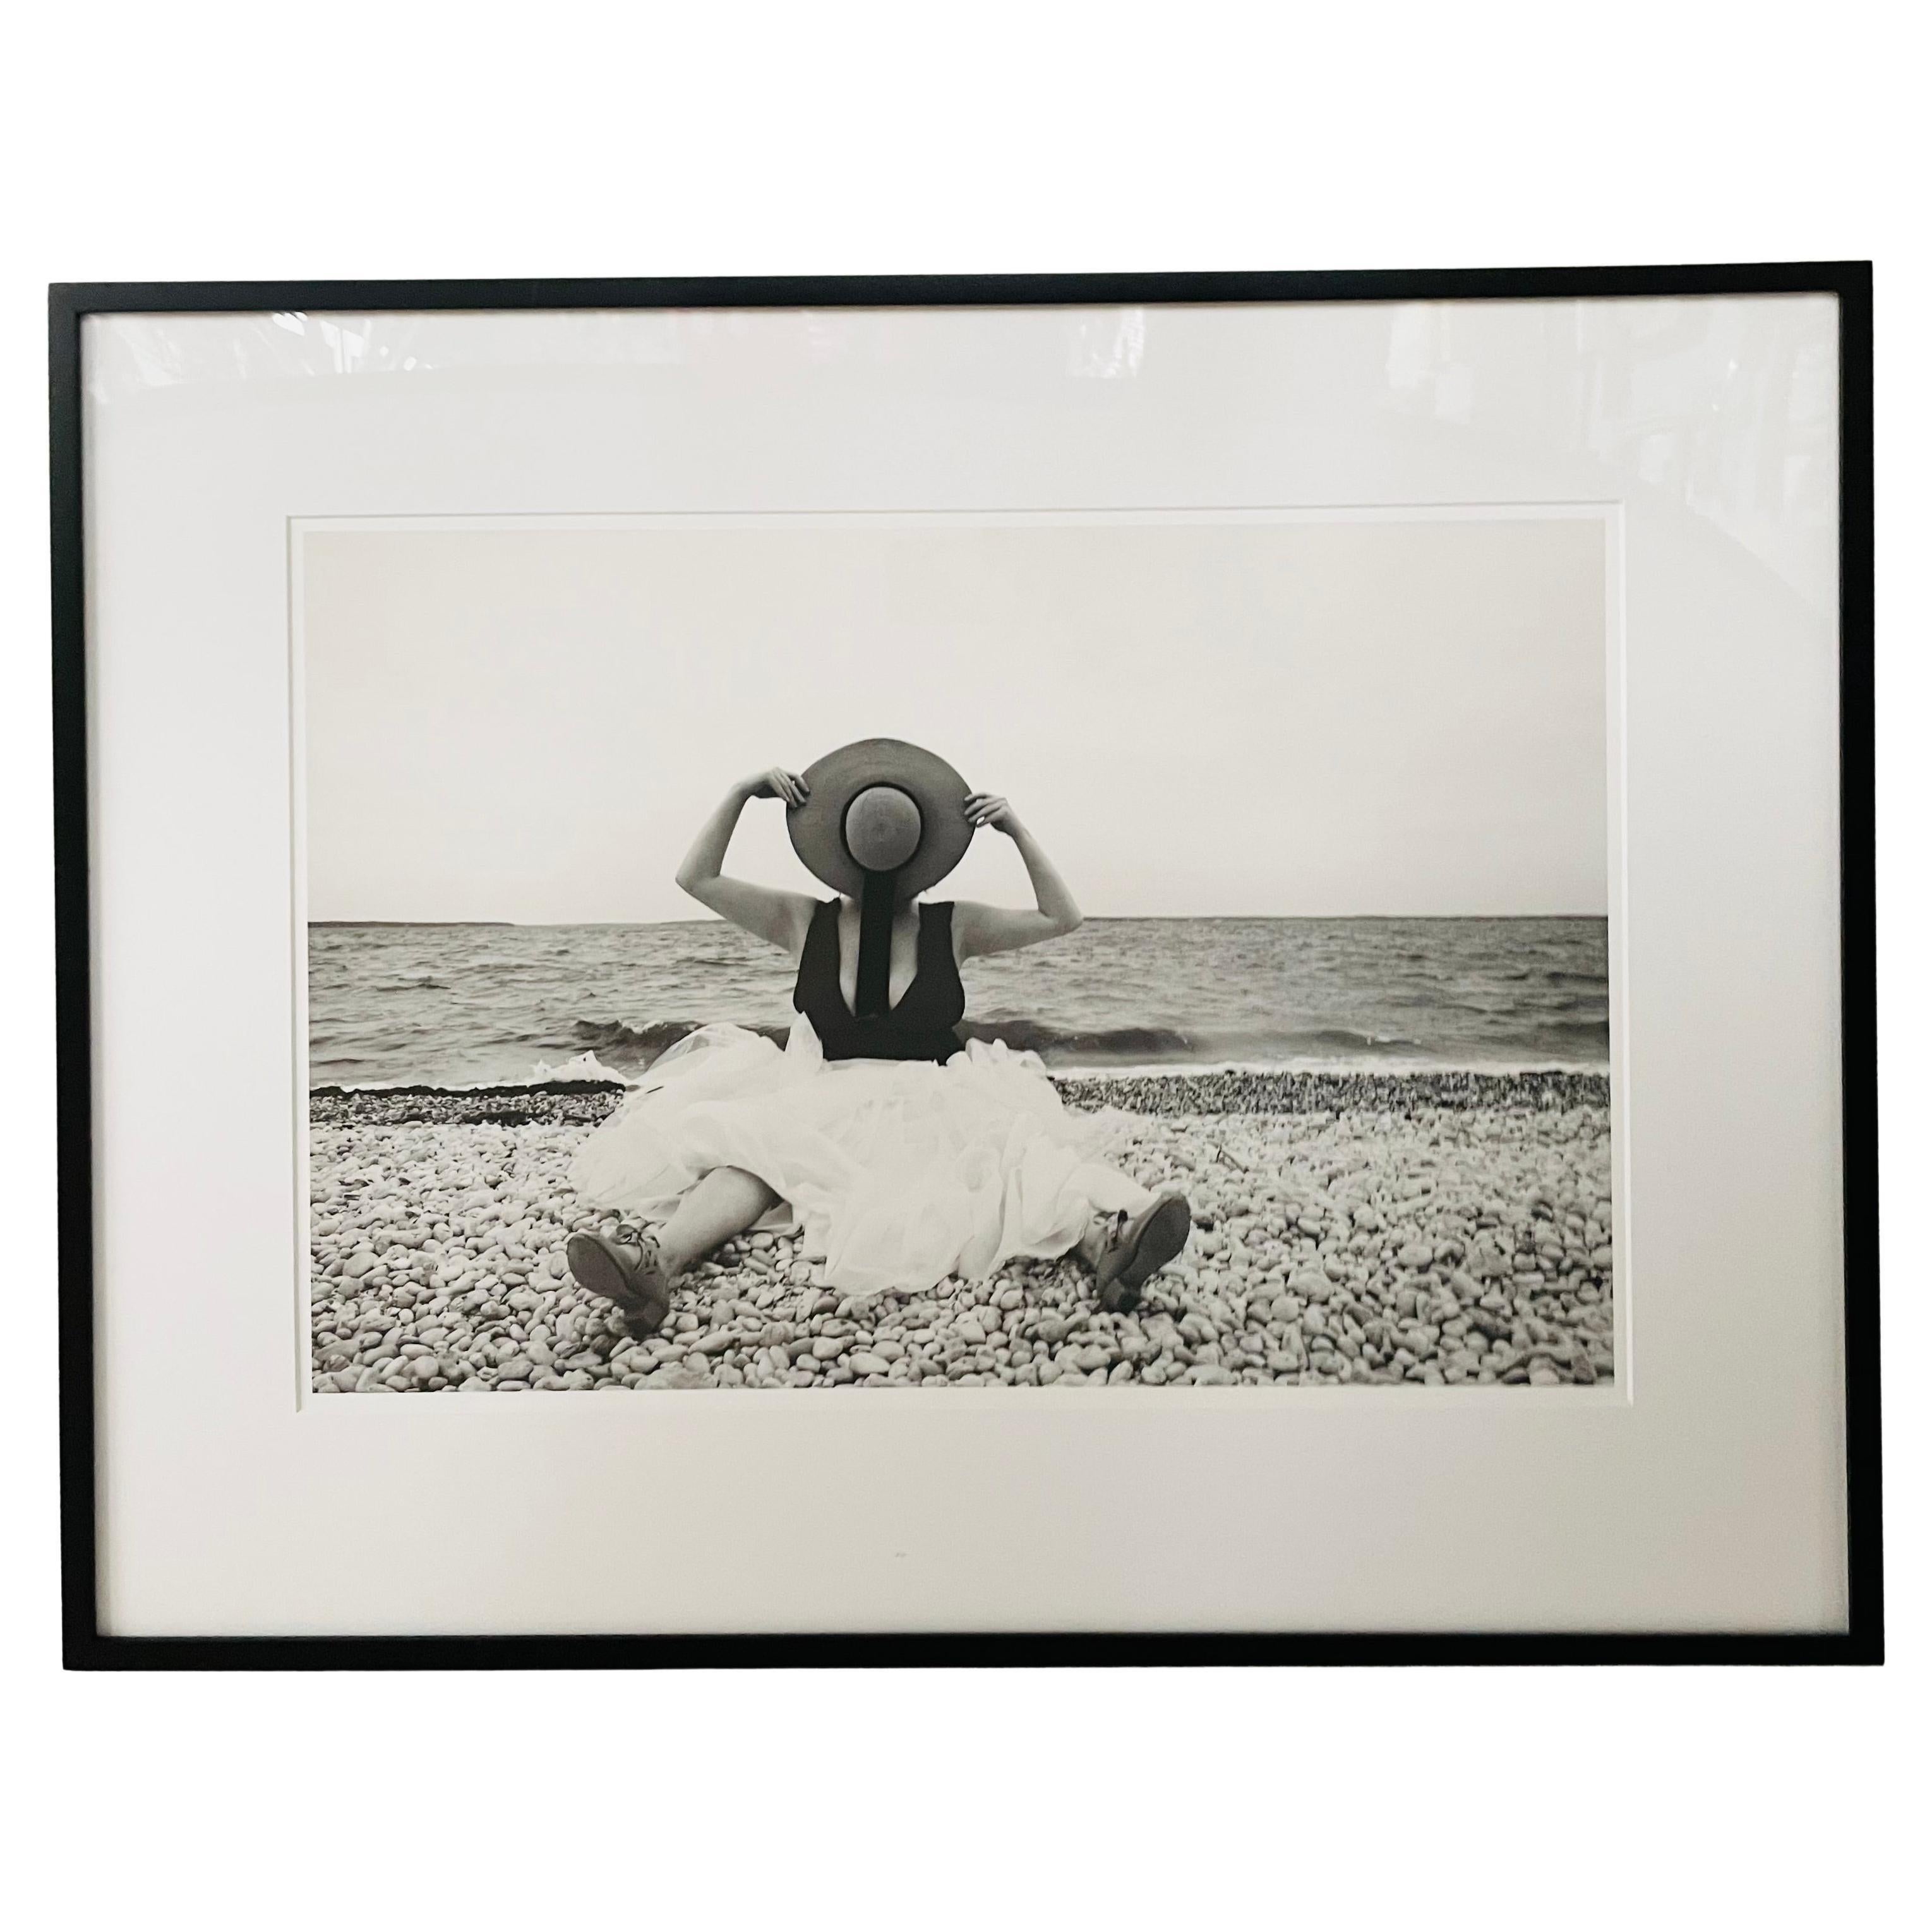 A contemporary portrait of a woman titled "Straw hat" by Luciana Pampalone ( American, 1963). The archival pigment print is made in black and white and part of Pampalone's Hamptons vintage collection series. The limited edition print is the first